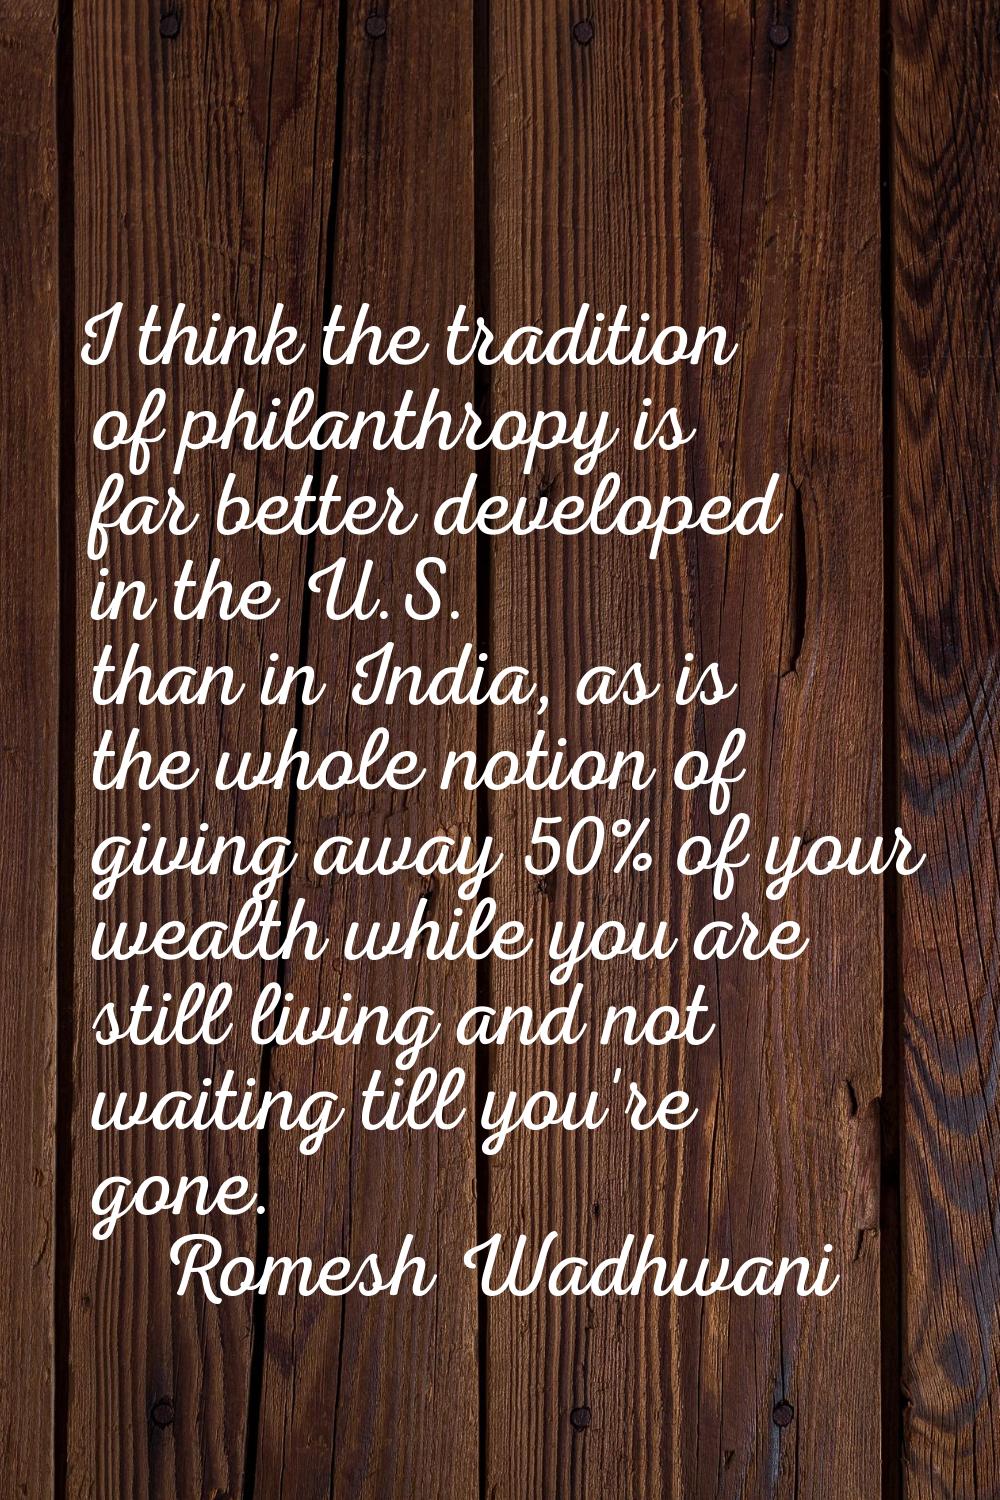 I think the tradition of philanthropy is far better developed in the U.S. than in India, as is the 